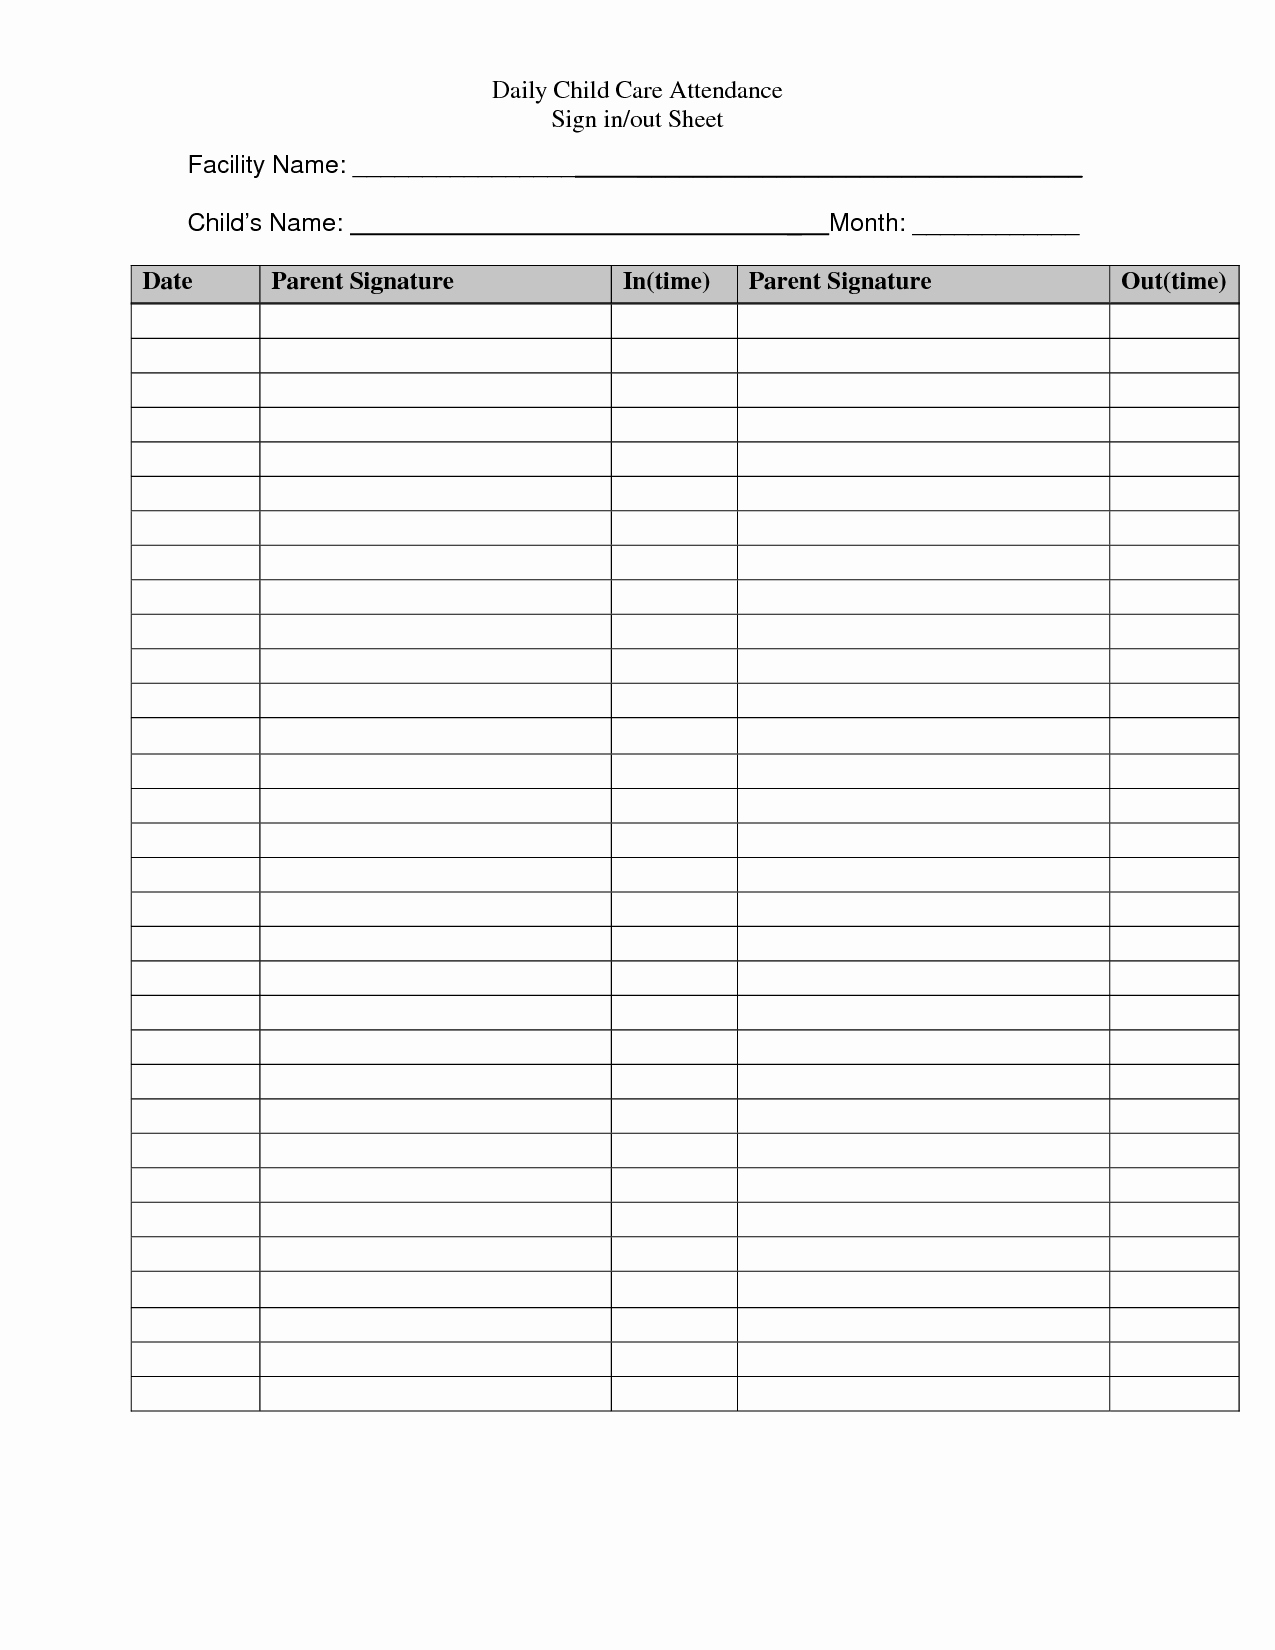 Sign In and Out Sheet New Templates that are Free for Daycare Signs